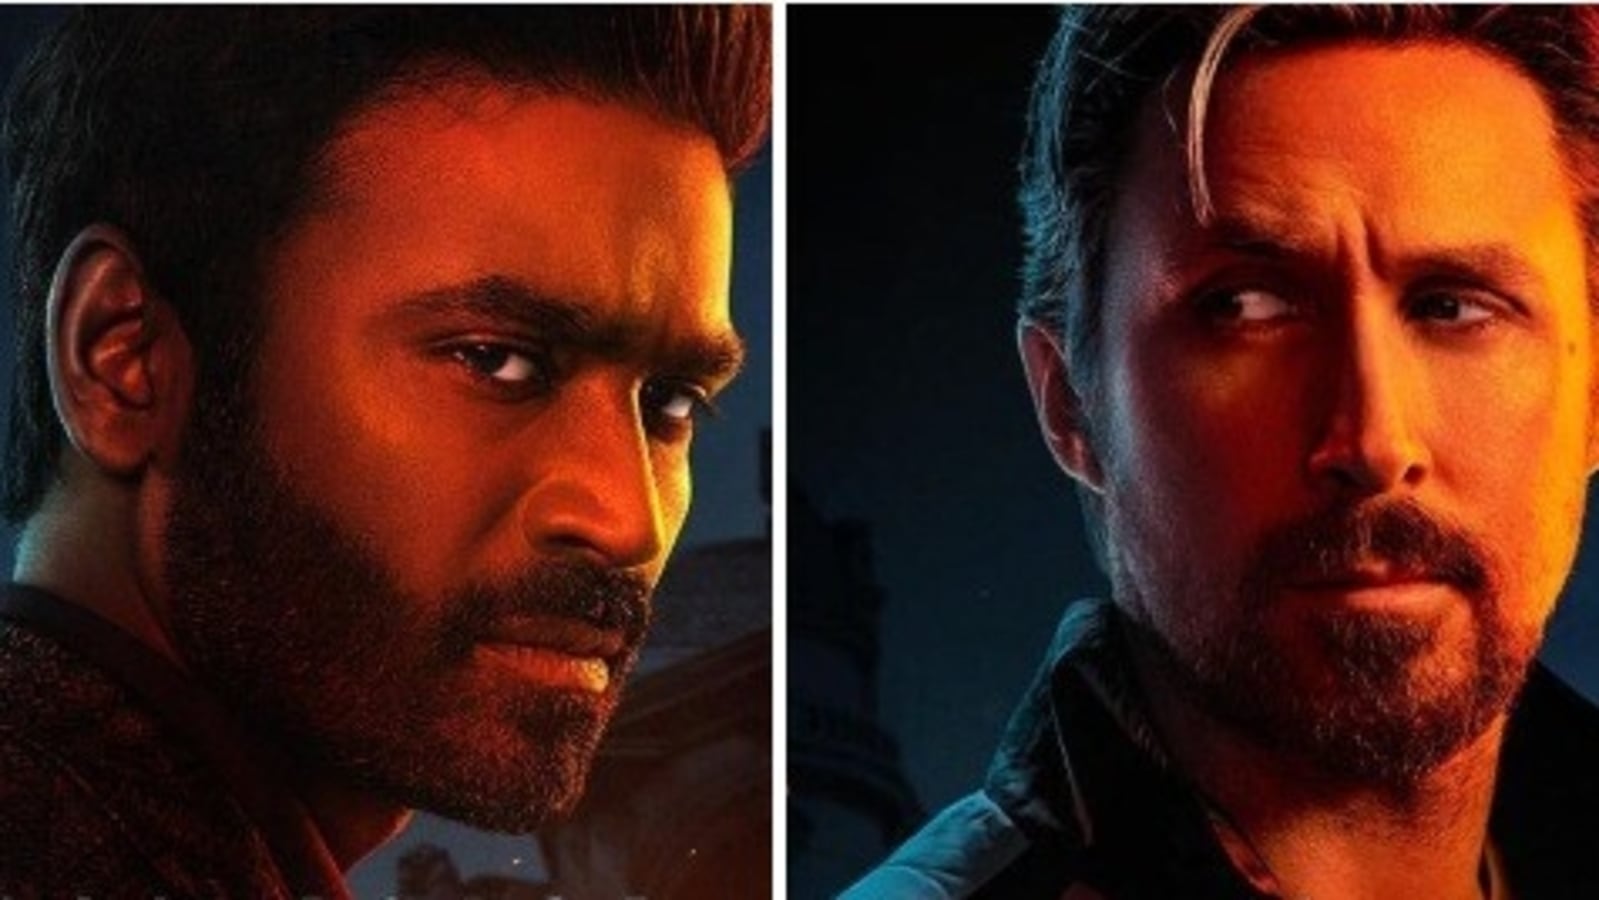 Ryan Gosling says ‘incredible’ Dhanush amazed him in The Gray Man fight scenes: ‘He never made a mistake’